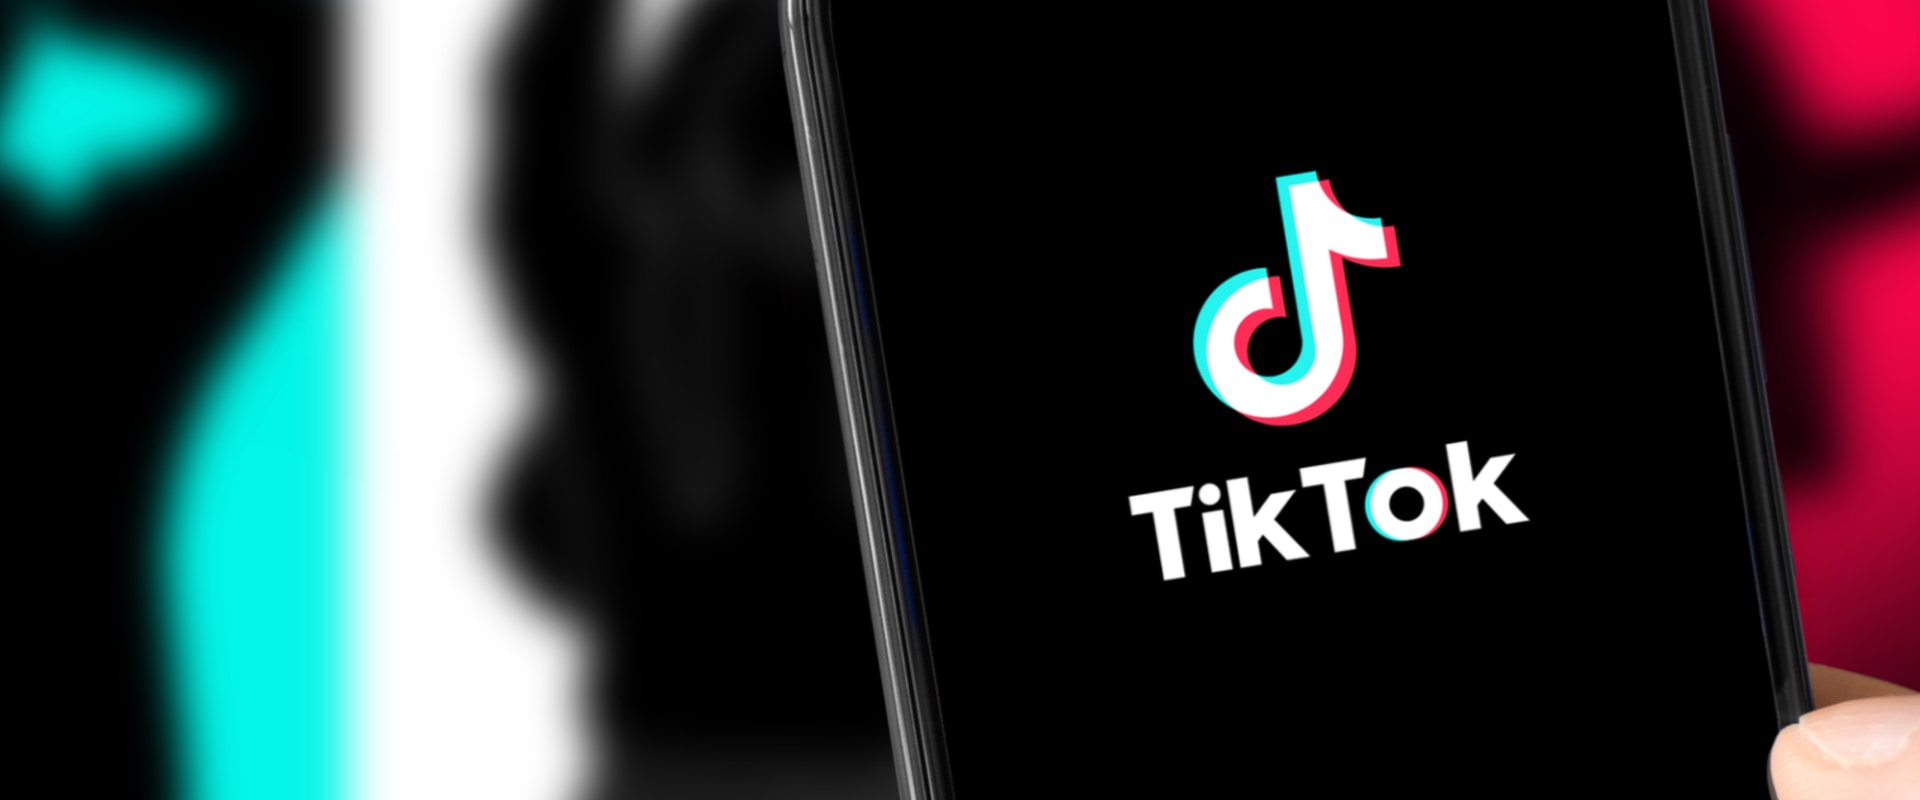 What is the success rate of tiktok ads?